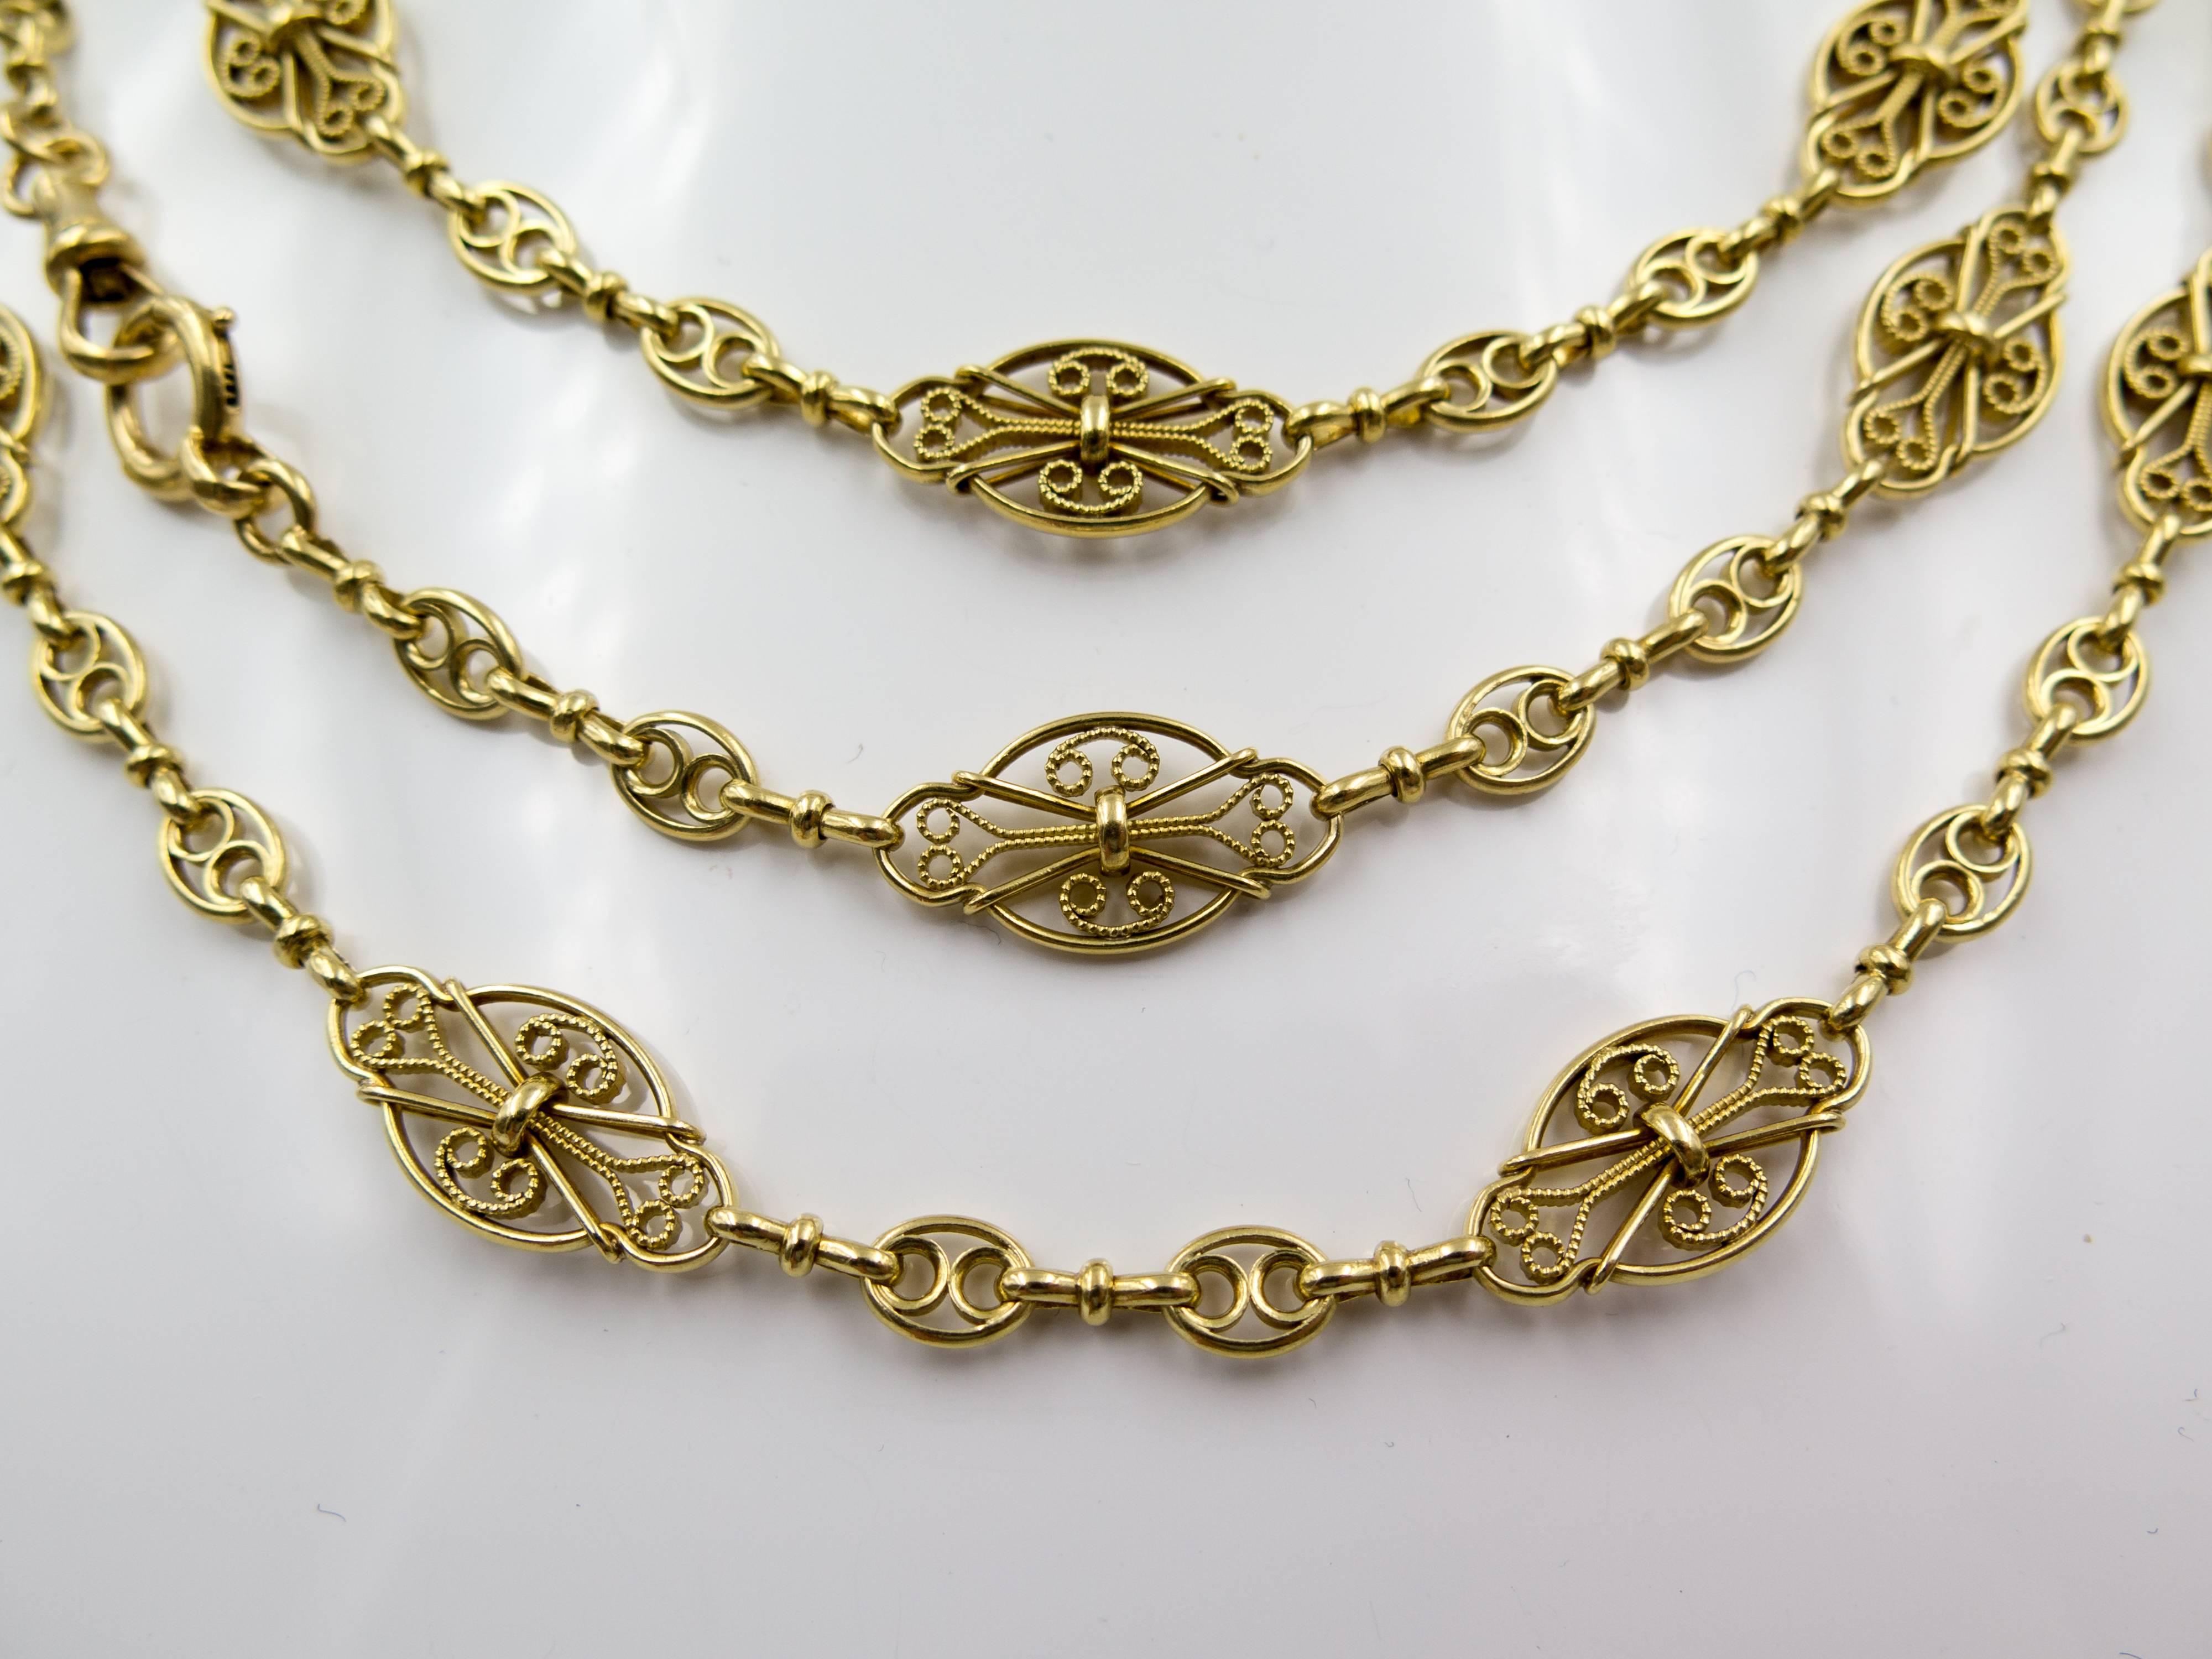  An exceptionally beautiful and detailed longchain, 60" total length, that can be worn single, doubled, or tripled (as pictured).  It can also be wrapped numerous times around a wrist as a luxurious bracelet.  The ornate scrolling within the